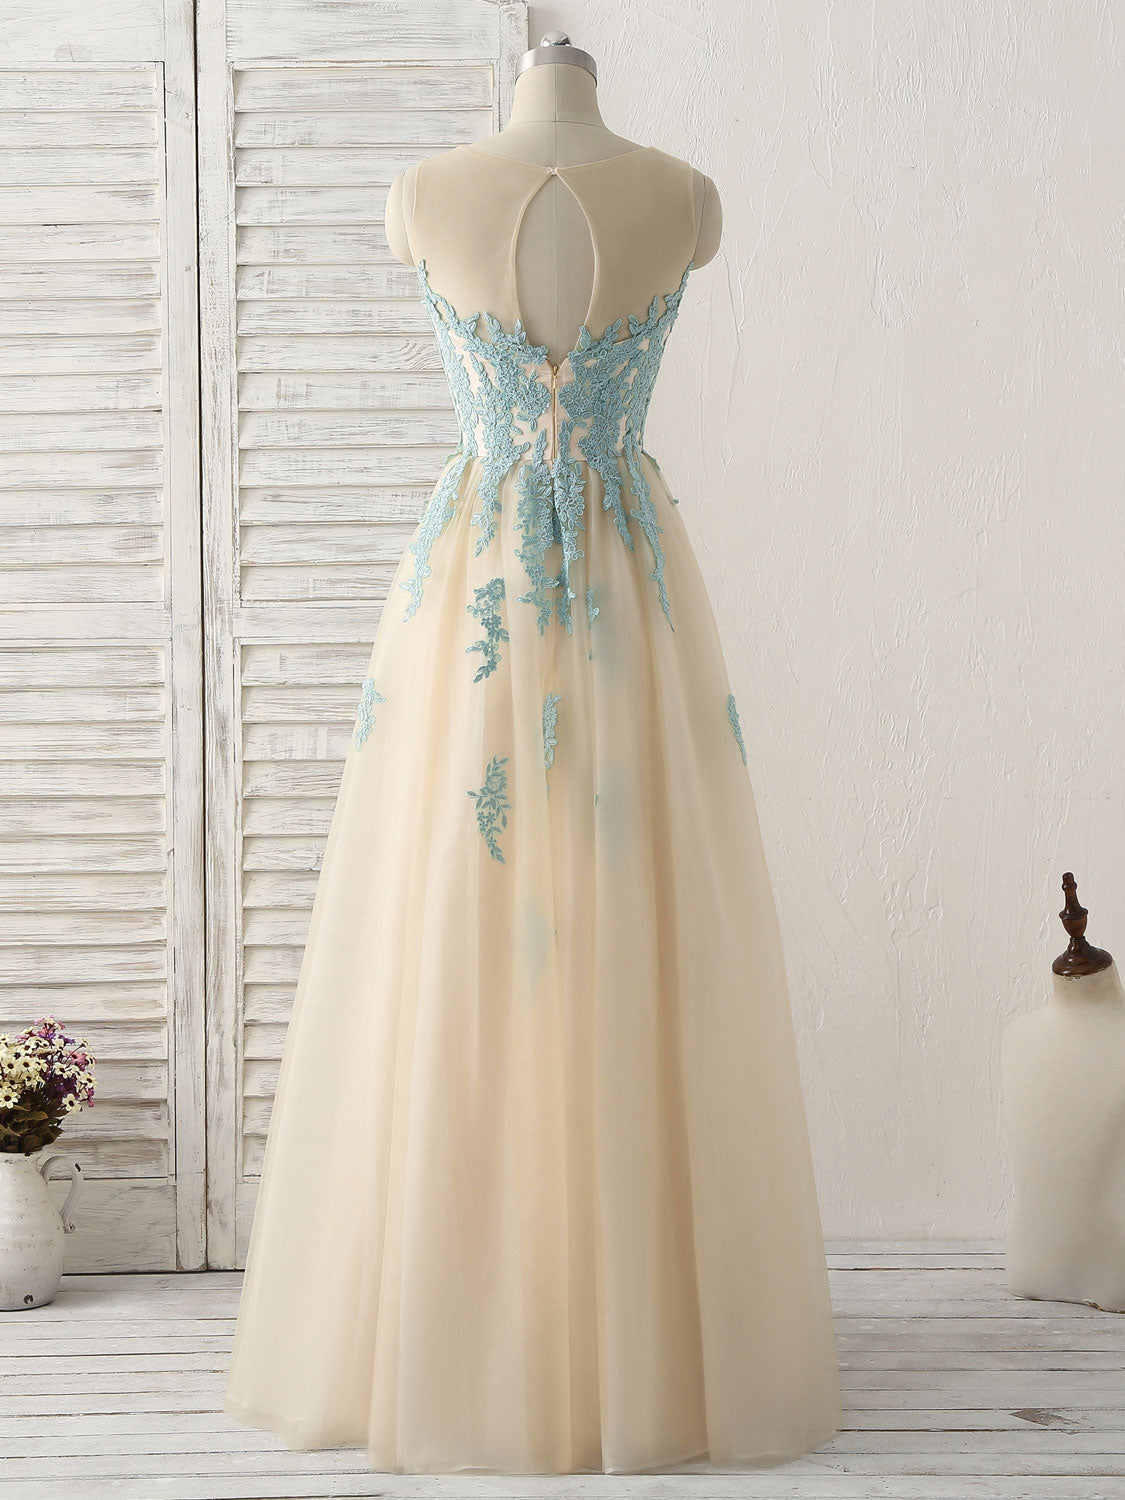 Prom Dresses Sites, Cute Champagne Lace Long Prom Dress, A Line Tulle Bridesmaid Dress